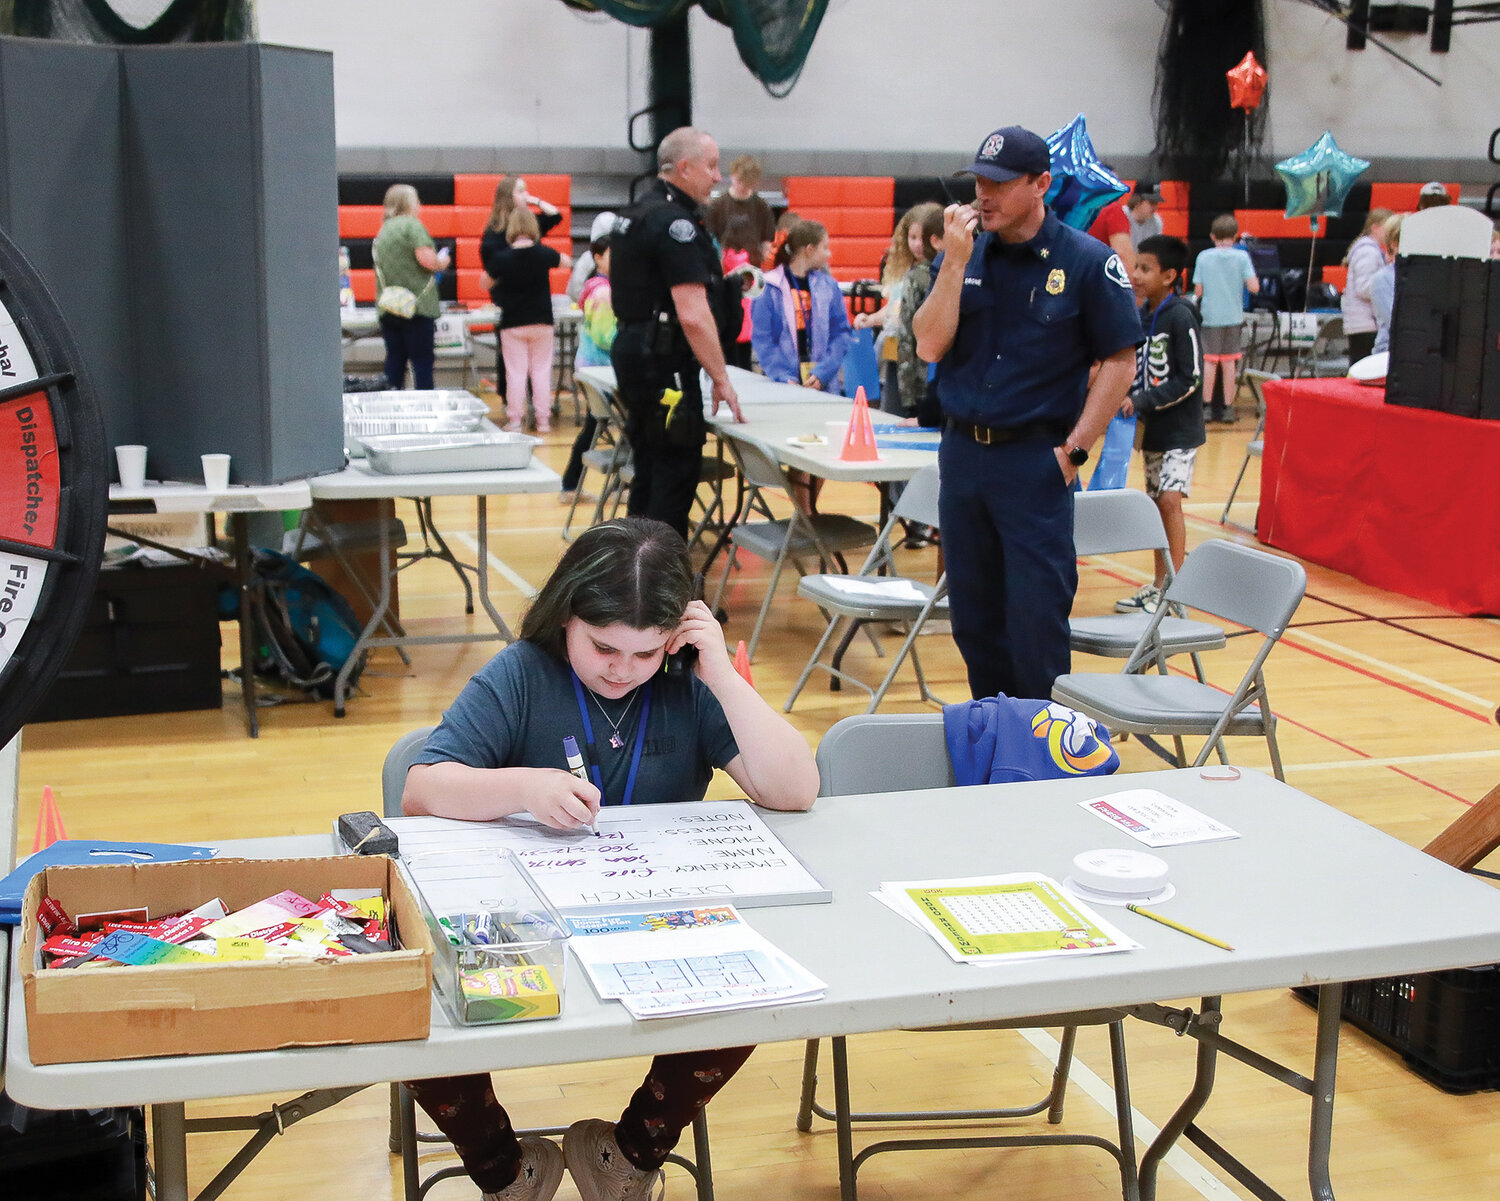 A student acts as a dispatcher at Clark County Fire District 3’s table at the fourth grade career fair at Battle Ground High School on Tuesday, May 30.